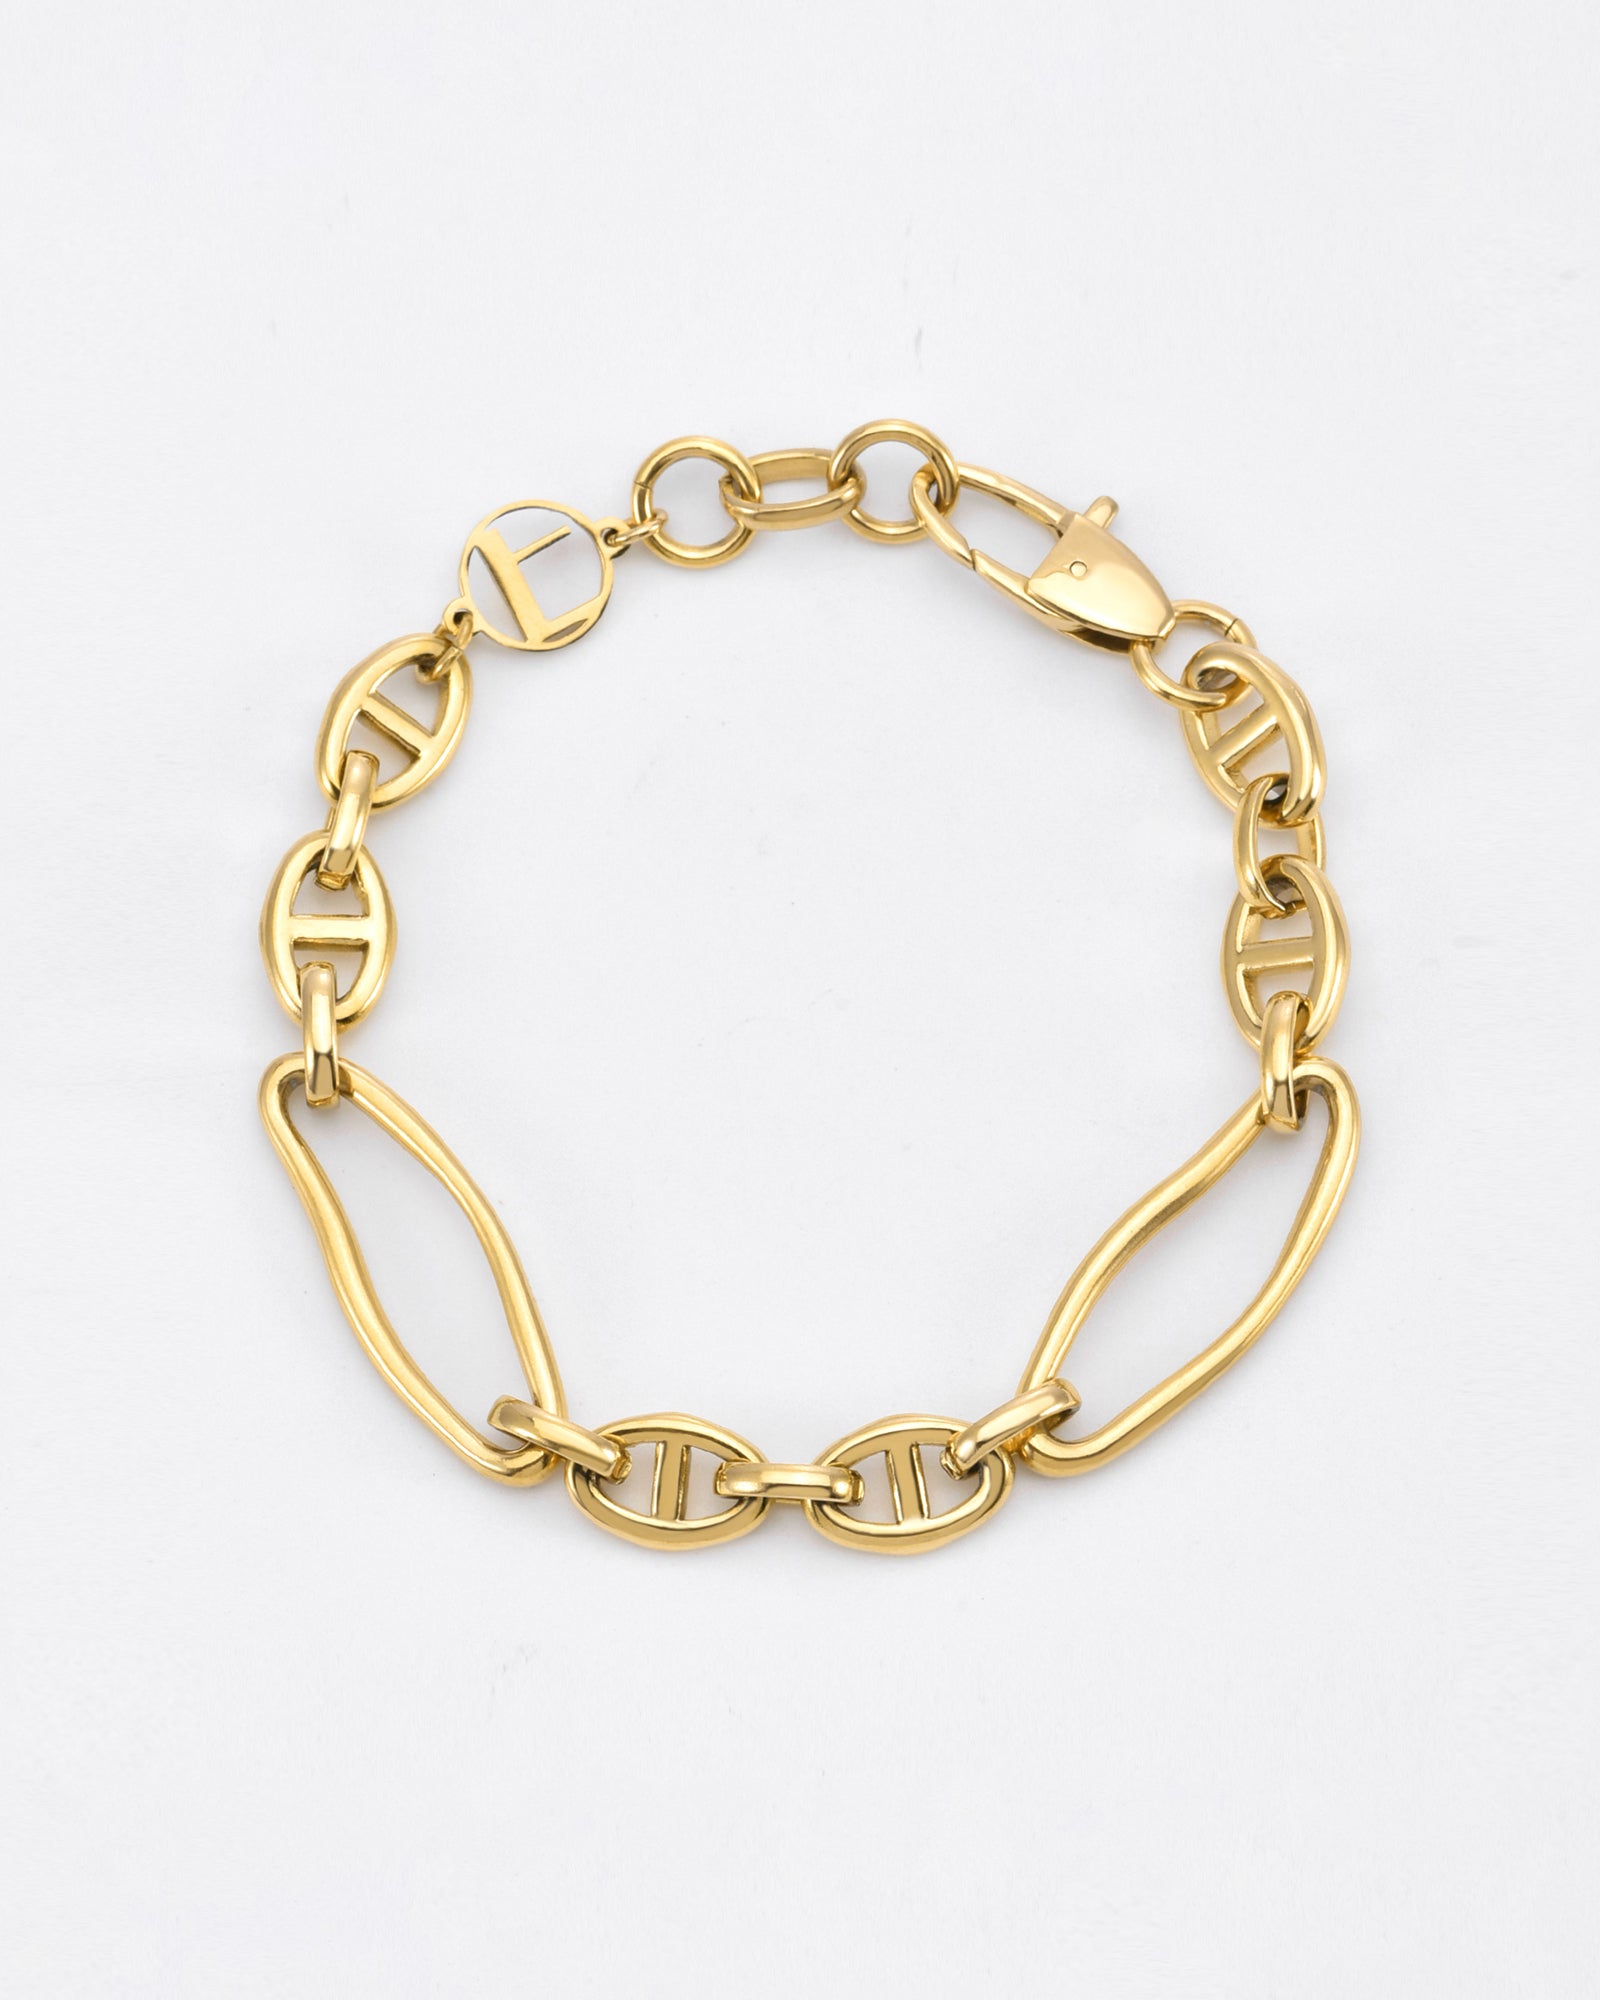 A delicate, 24k gold plated bracelet featuring an alternating pattern of oval and elongated link chains. It has a polished finish and a lobster clasp closure. This elegant Portrait Bracelet Gold by For Art's Sake® boasts a minimalist design against a plain white background and is hypoallergenic for sensitive skin.